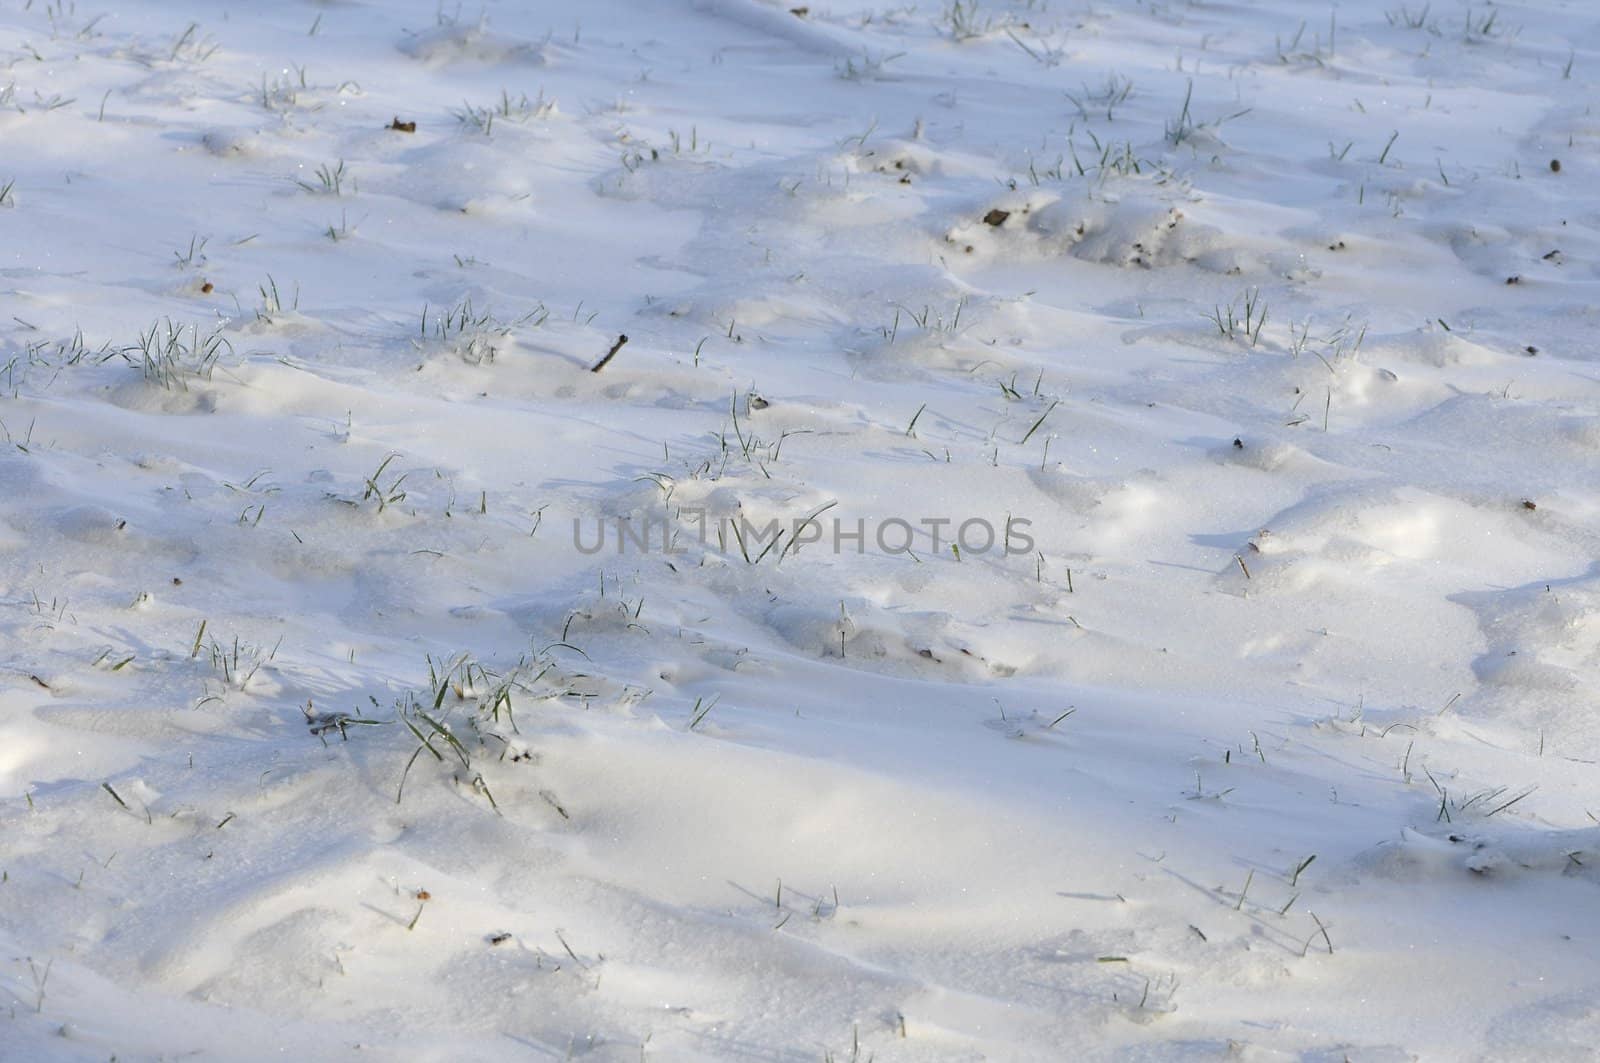 Snowed field with green grass stems very iced